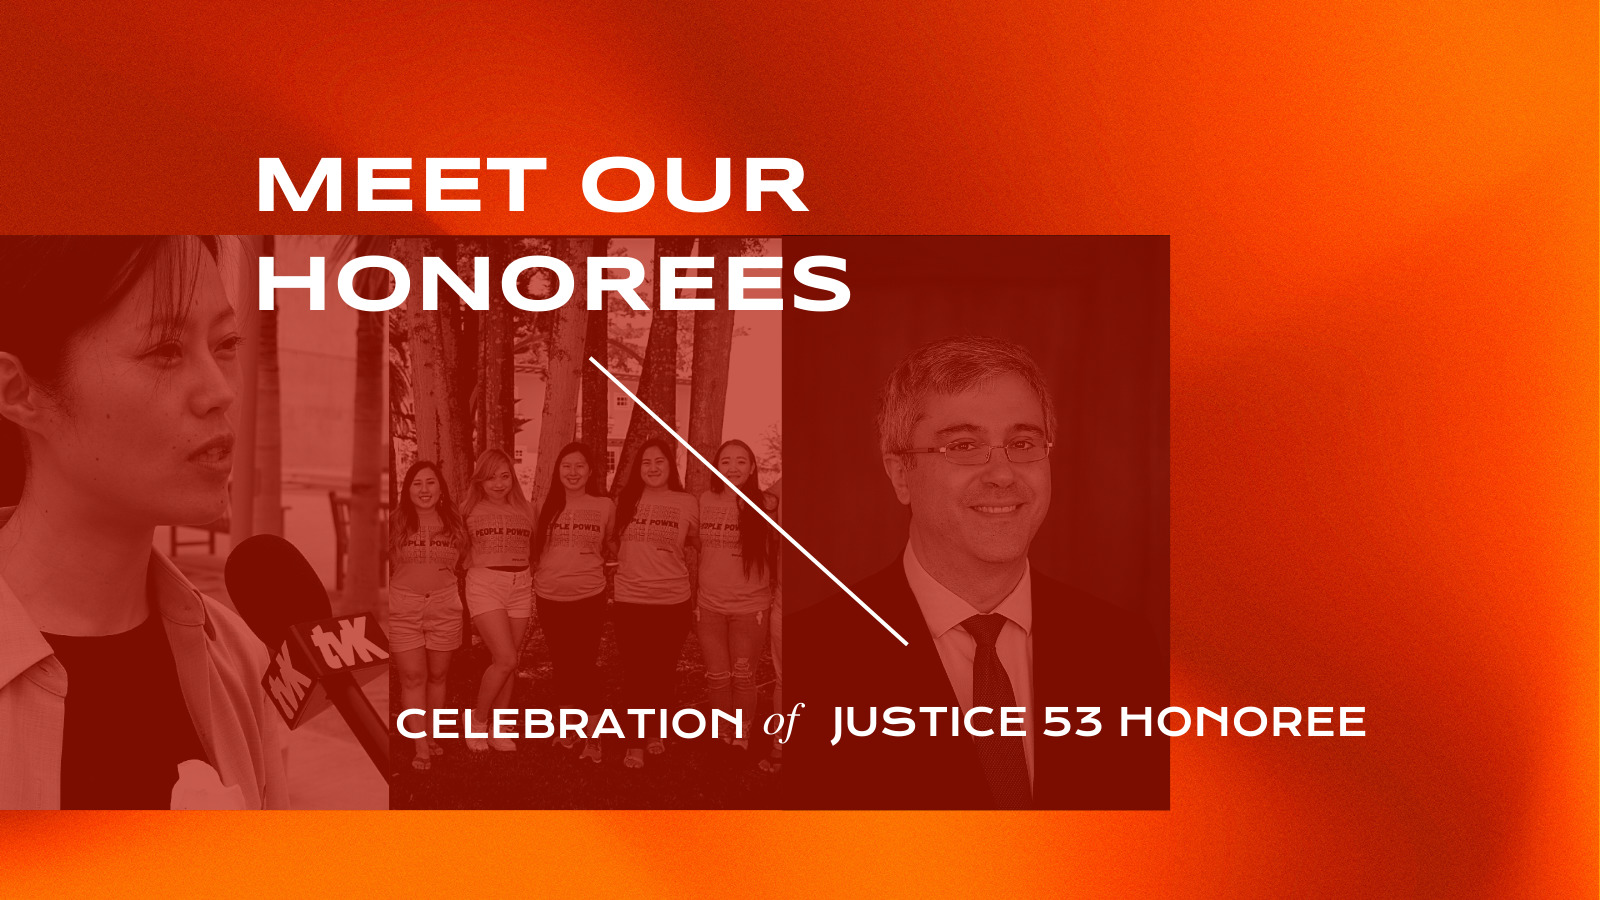 Meet Our Honorees. Celebration of Justice 53 Honoree